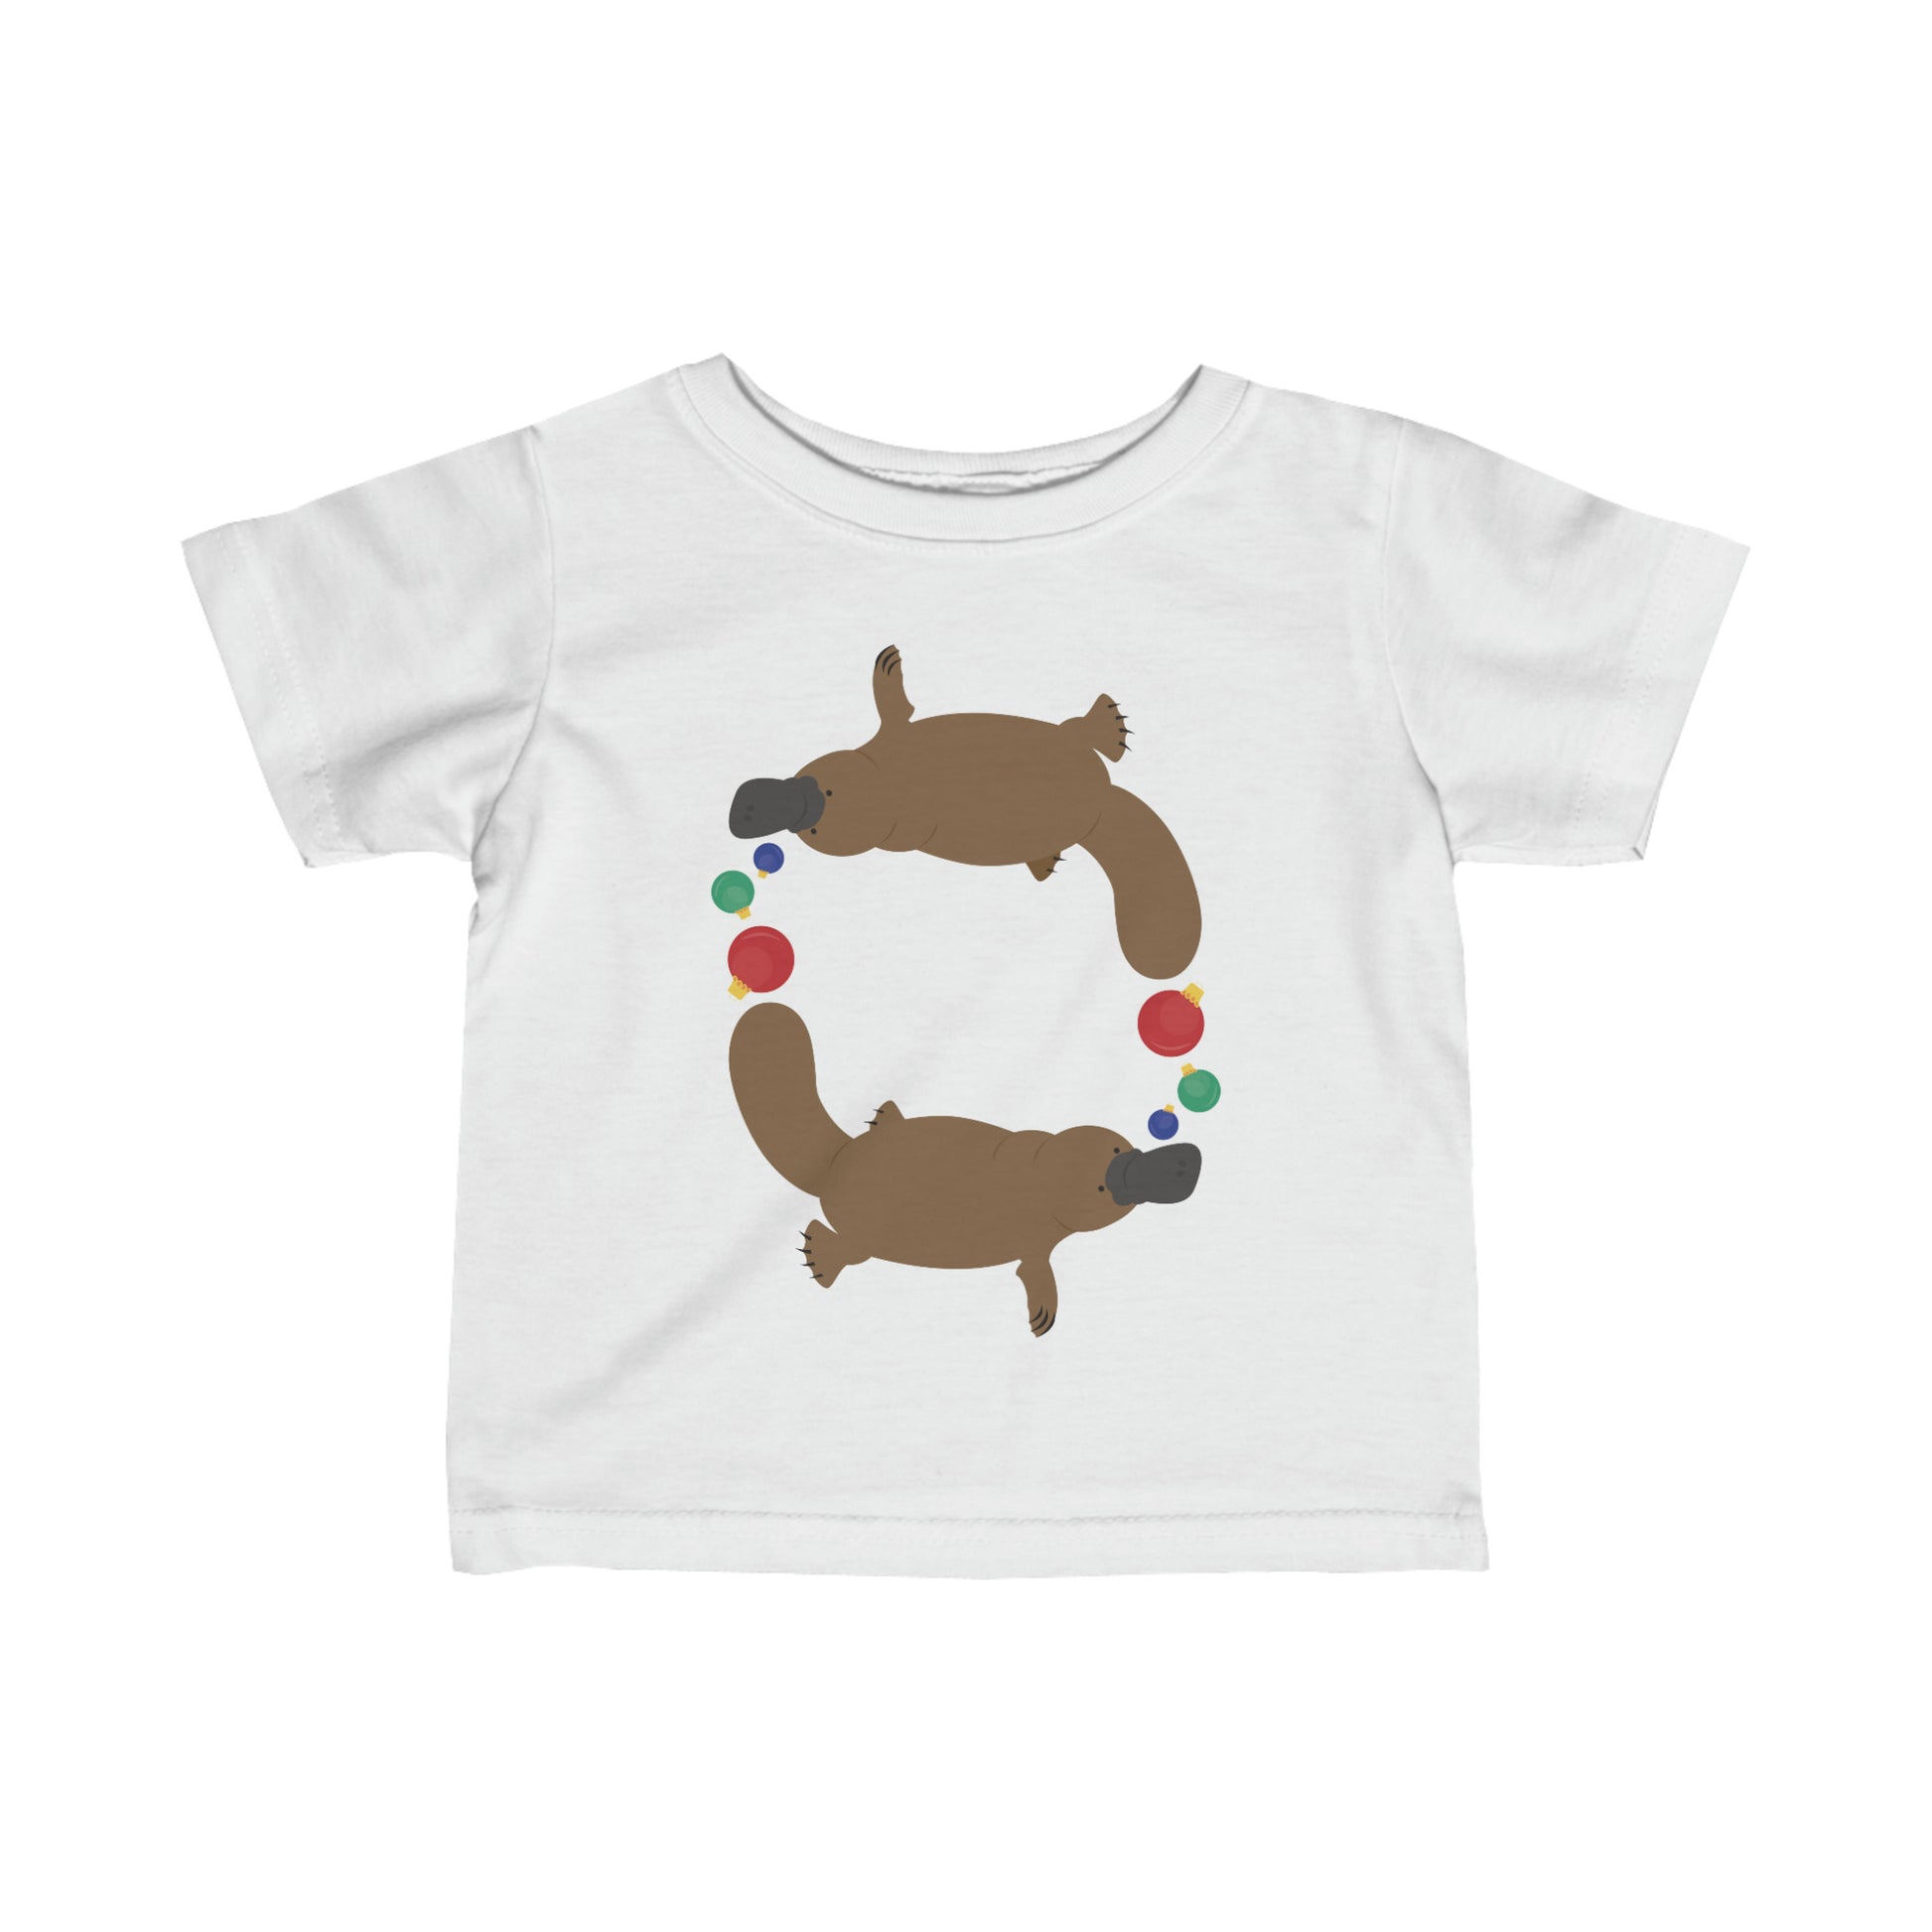 White baby tshrt with design of platypus chasing Christmas baubles